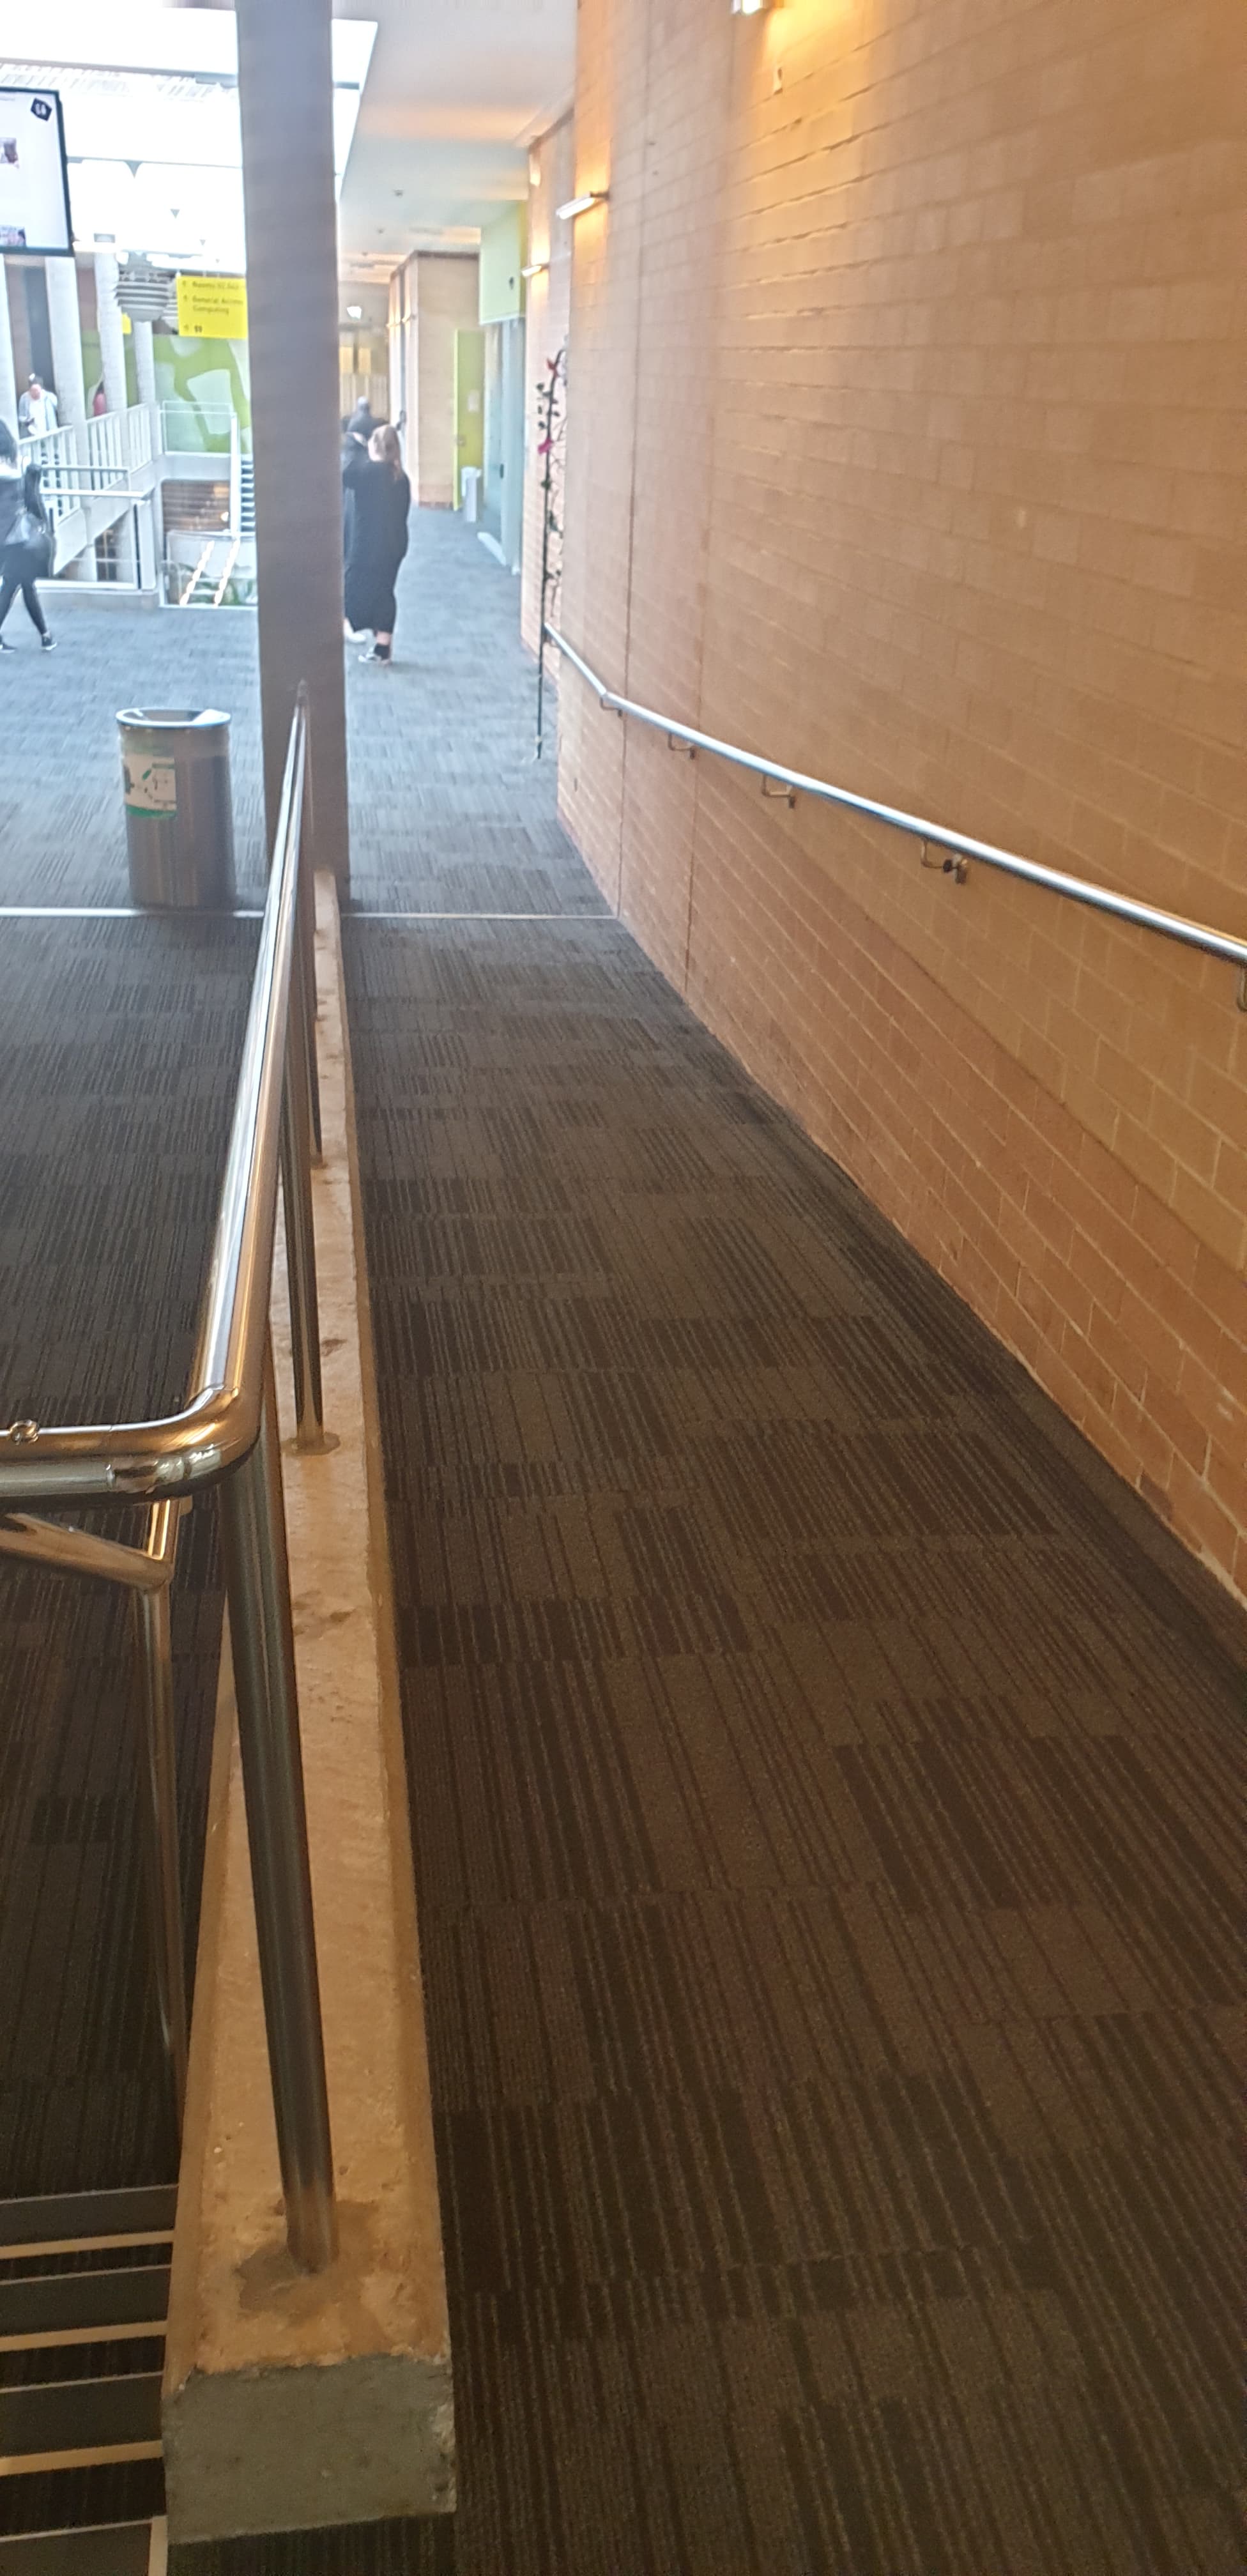 A wheelchair ramp next to a set of stairs.